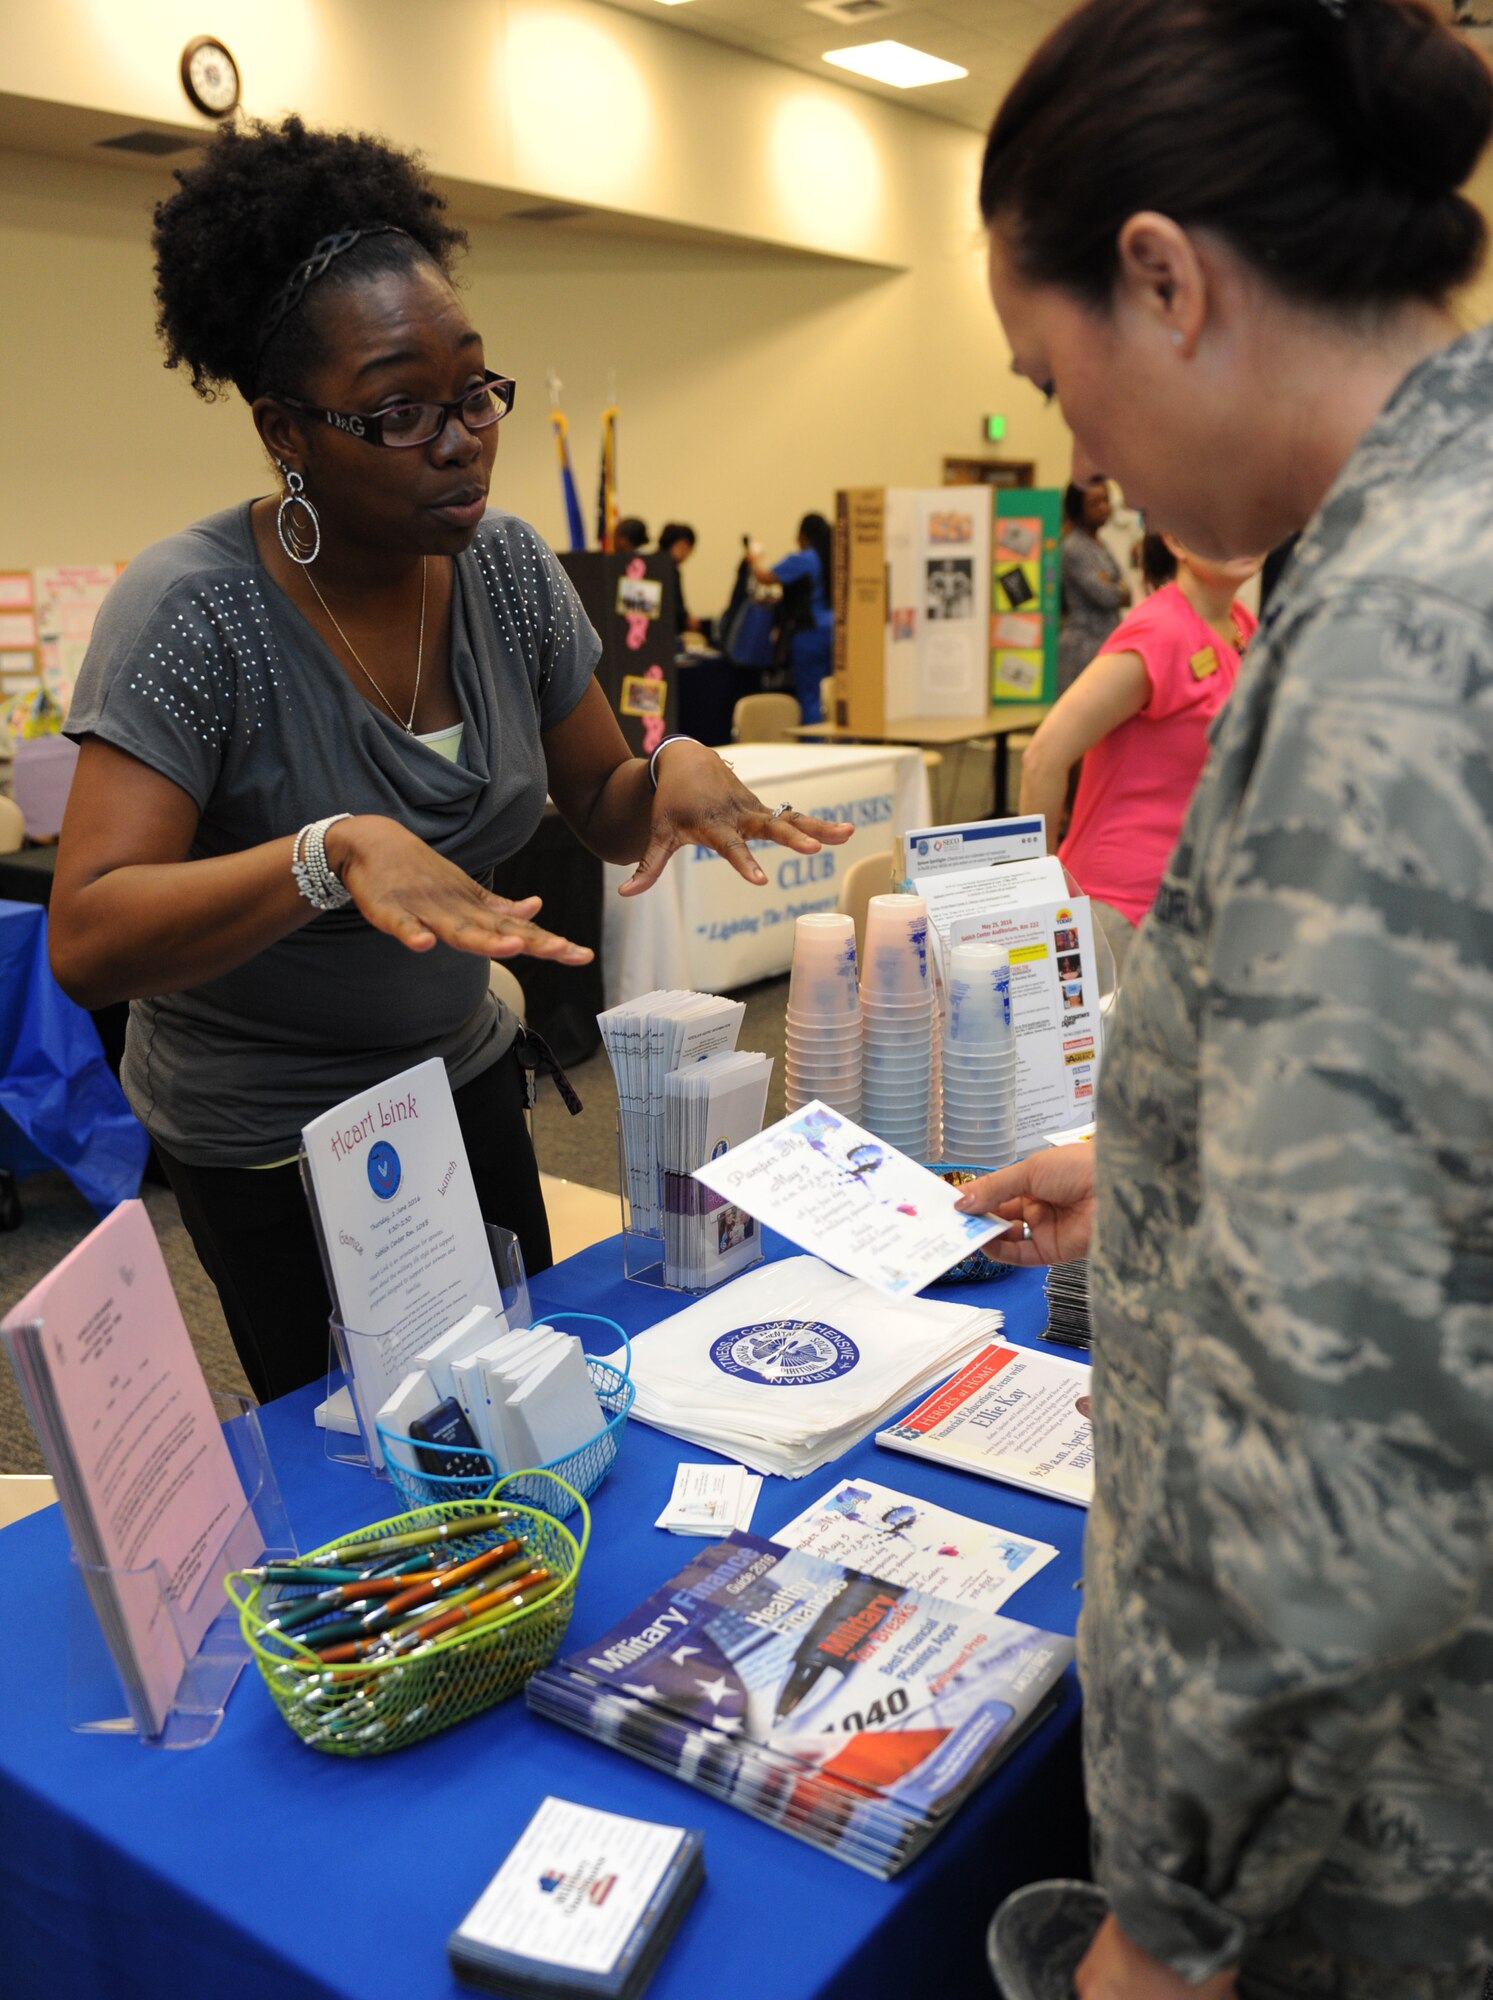 Nakisha Hall, 81st Force Support Squadron community readiness specialist, explains what the Airman and Family Readiness Center has to offer to Lt. Col. Elizabeth Aptekar, 335th Training Squadron commander, during the National Women’s History Fair at the Roberts Consolidated Maintenance Facility Mar. 24, 2016, Keesler Air Force Base, Miss. The event was held in honor of National Women’s History Month.  Also included, were health and informational booths, a guest panel of accomplished women and a presentation honoring Keesler women of distinction.  (U.S. Air Force photo by Kemberly Groue)